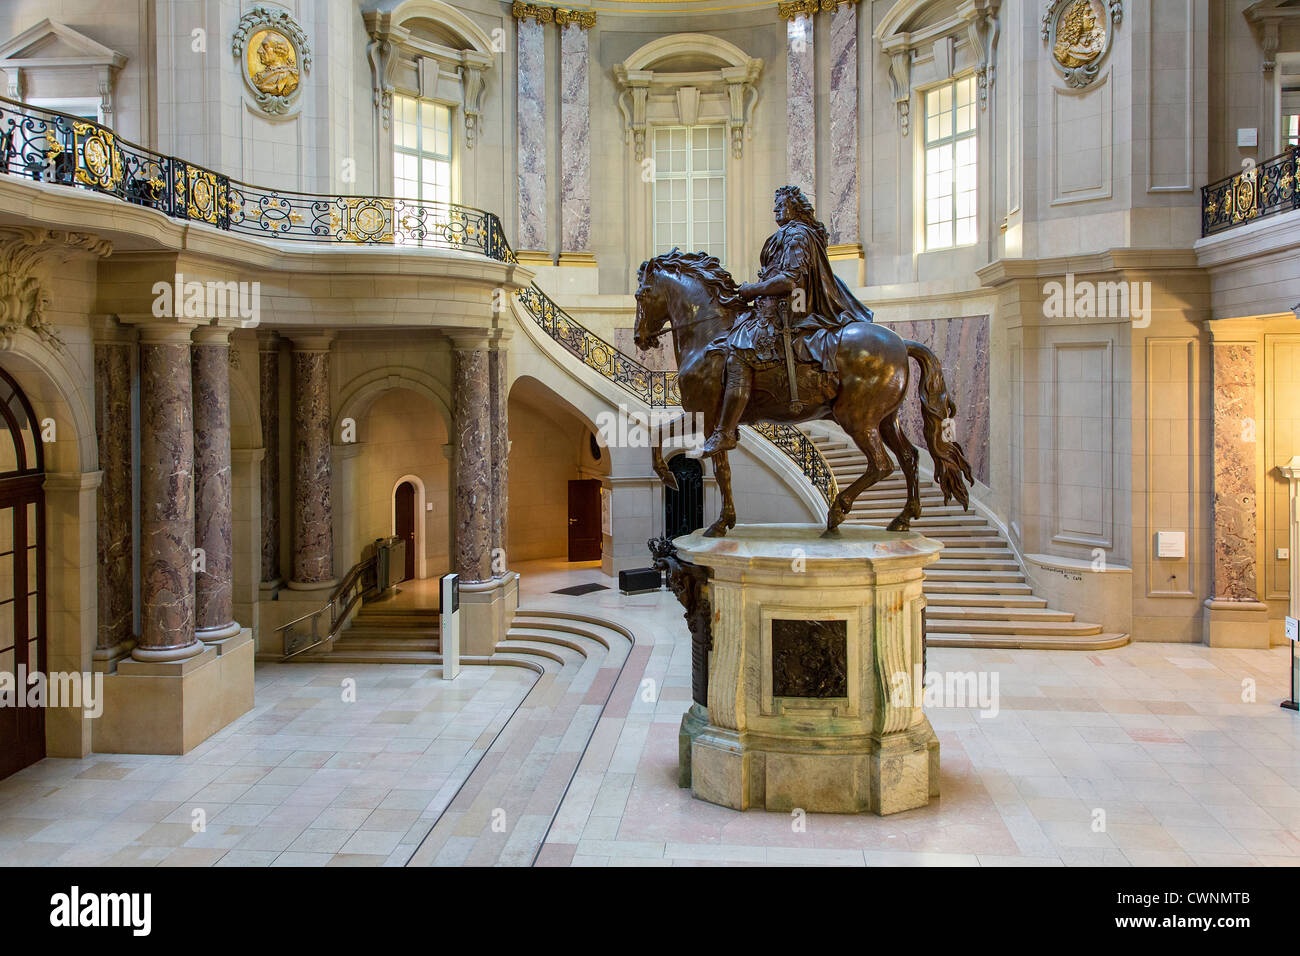 Europe, Germany, Berlin, Museumsinsel (Museums Island), The entrance hall of the Bode Museum Stock Photo